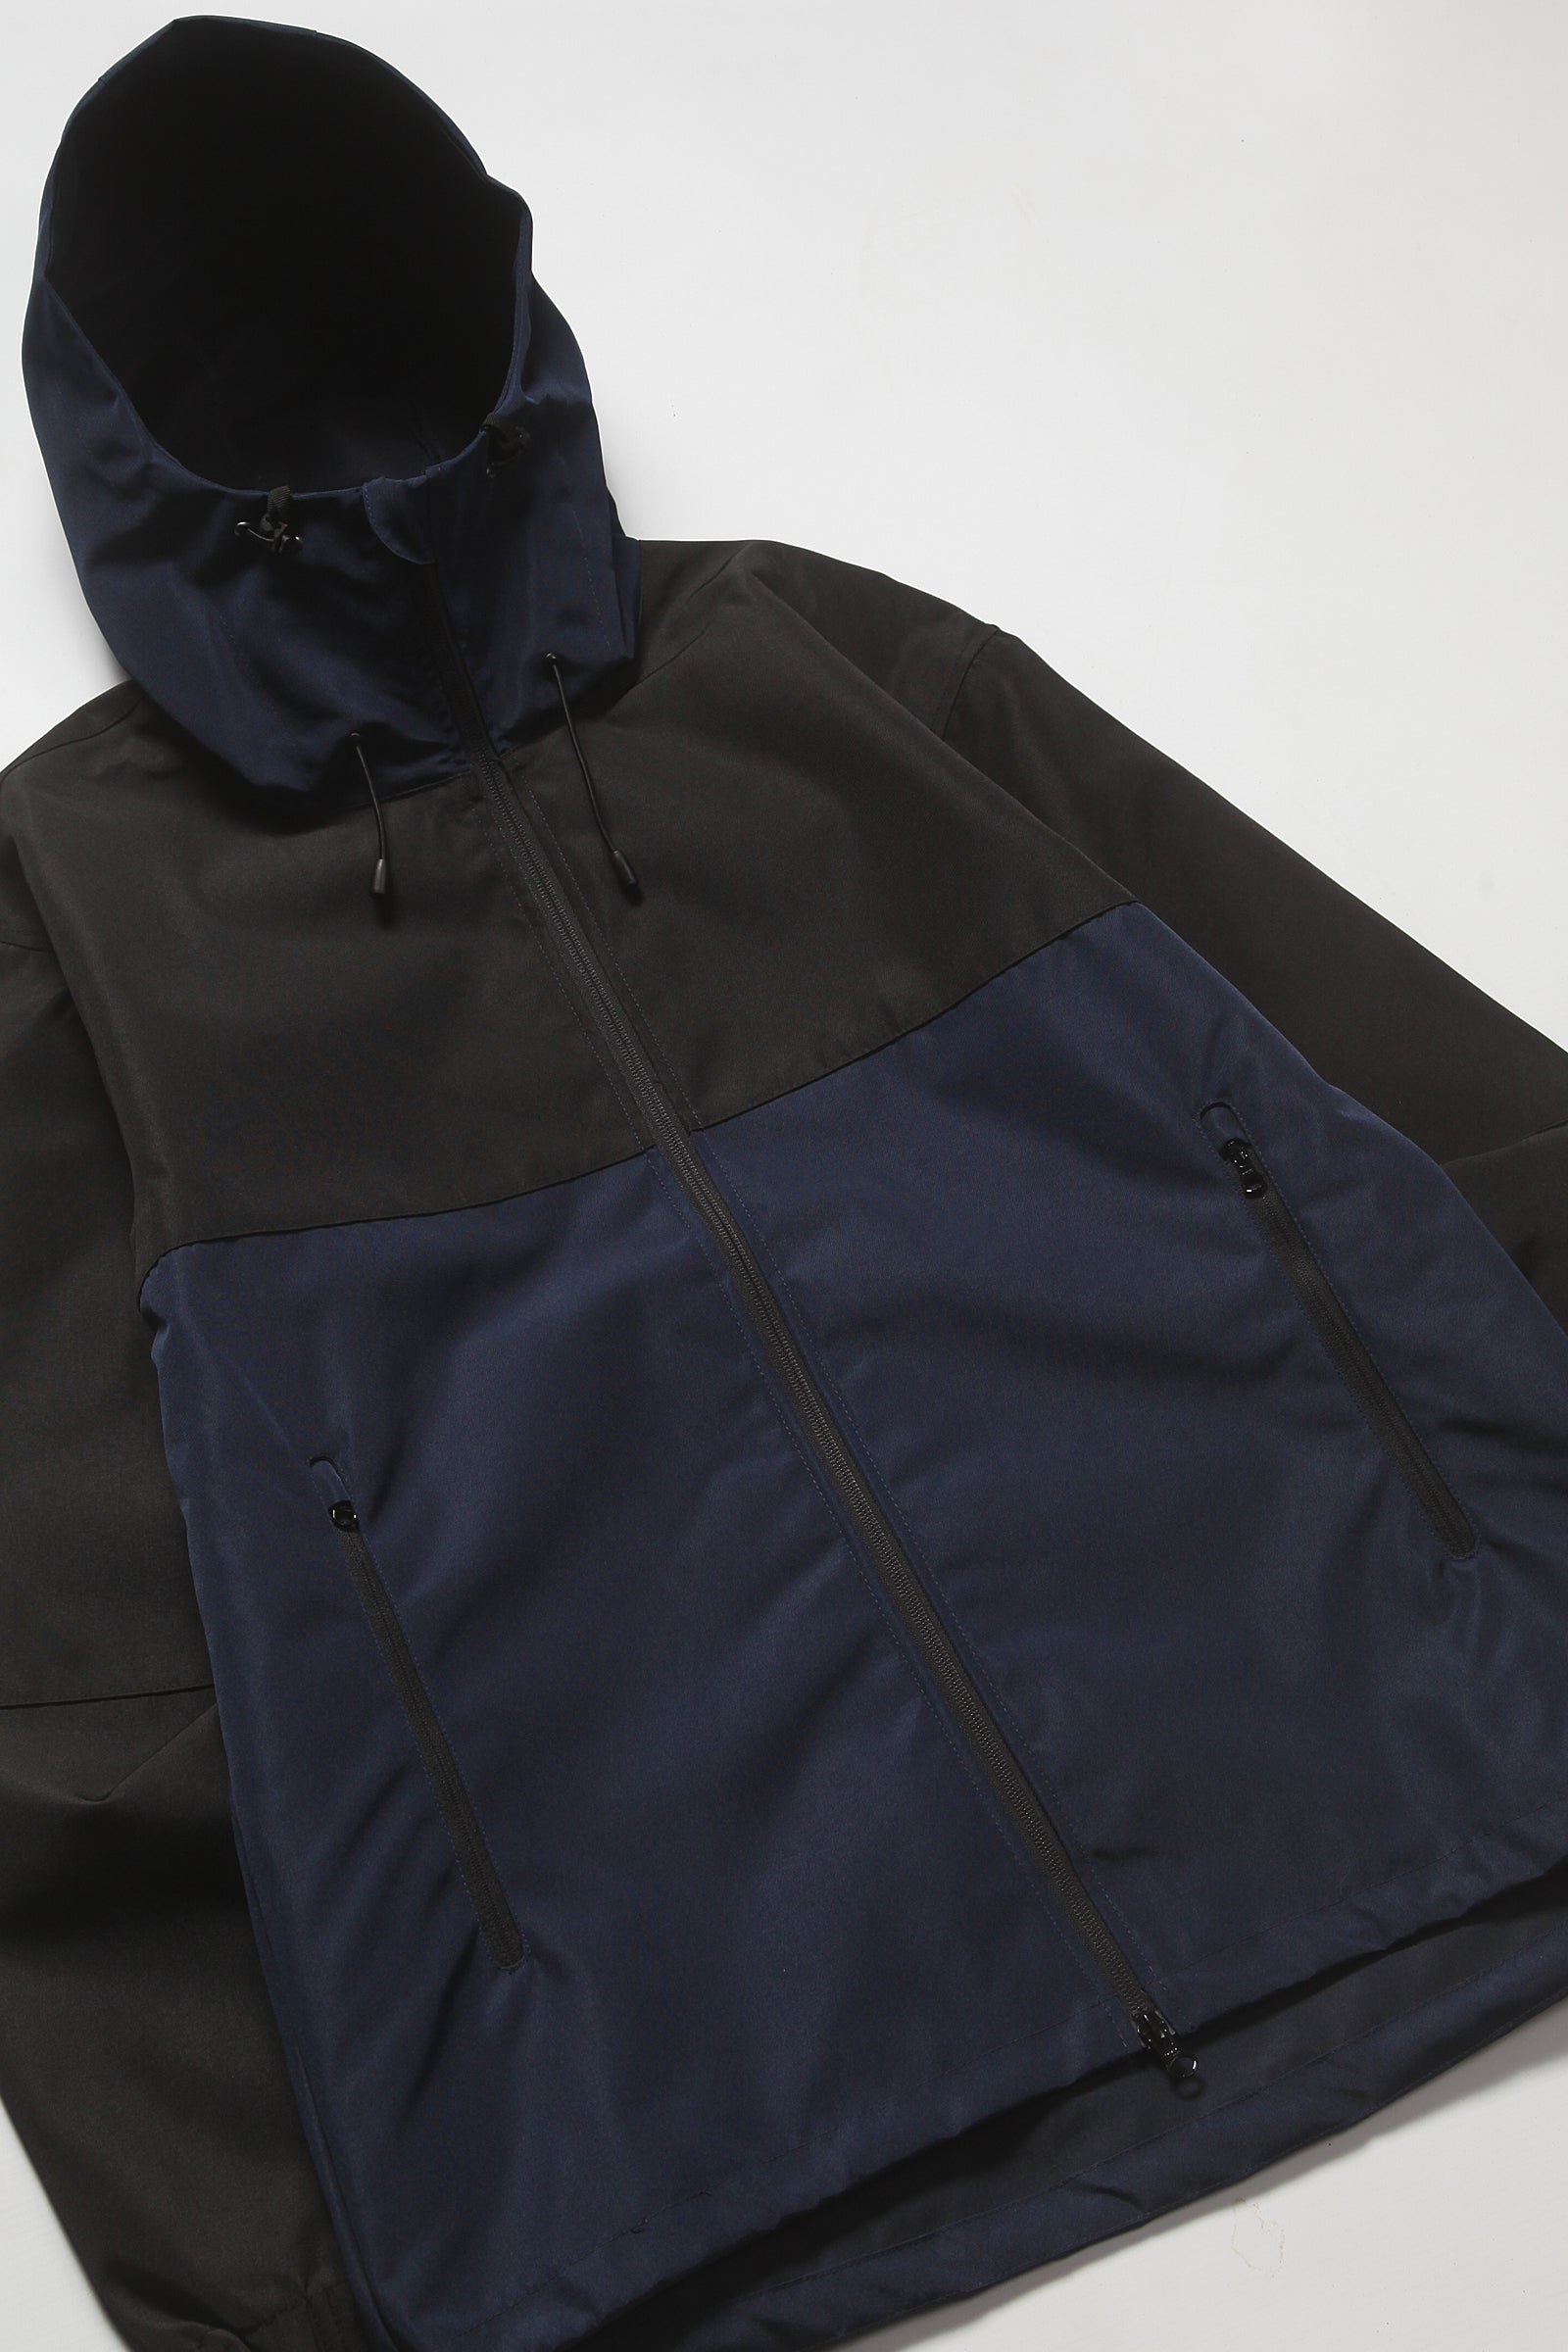 United Athle - 7489 Two Tone Shell Parka - Navy/Black